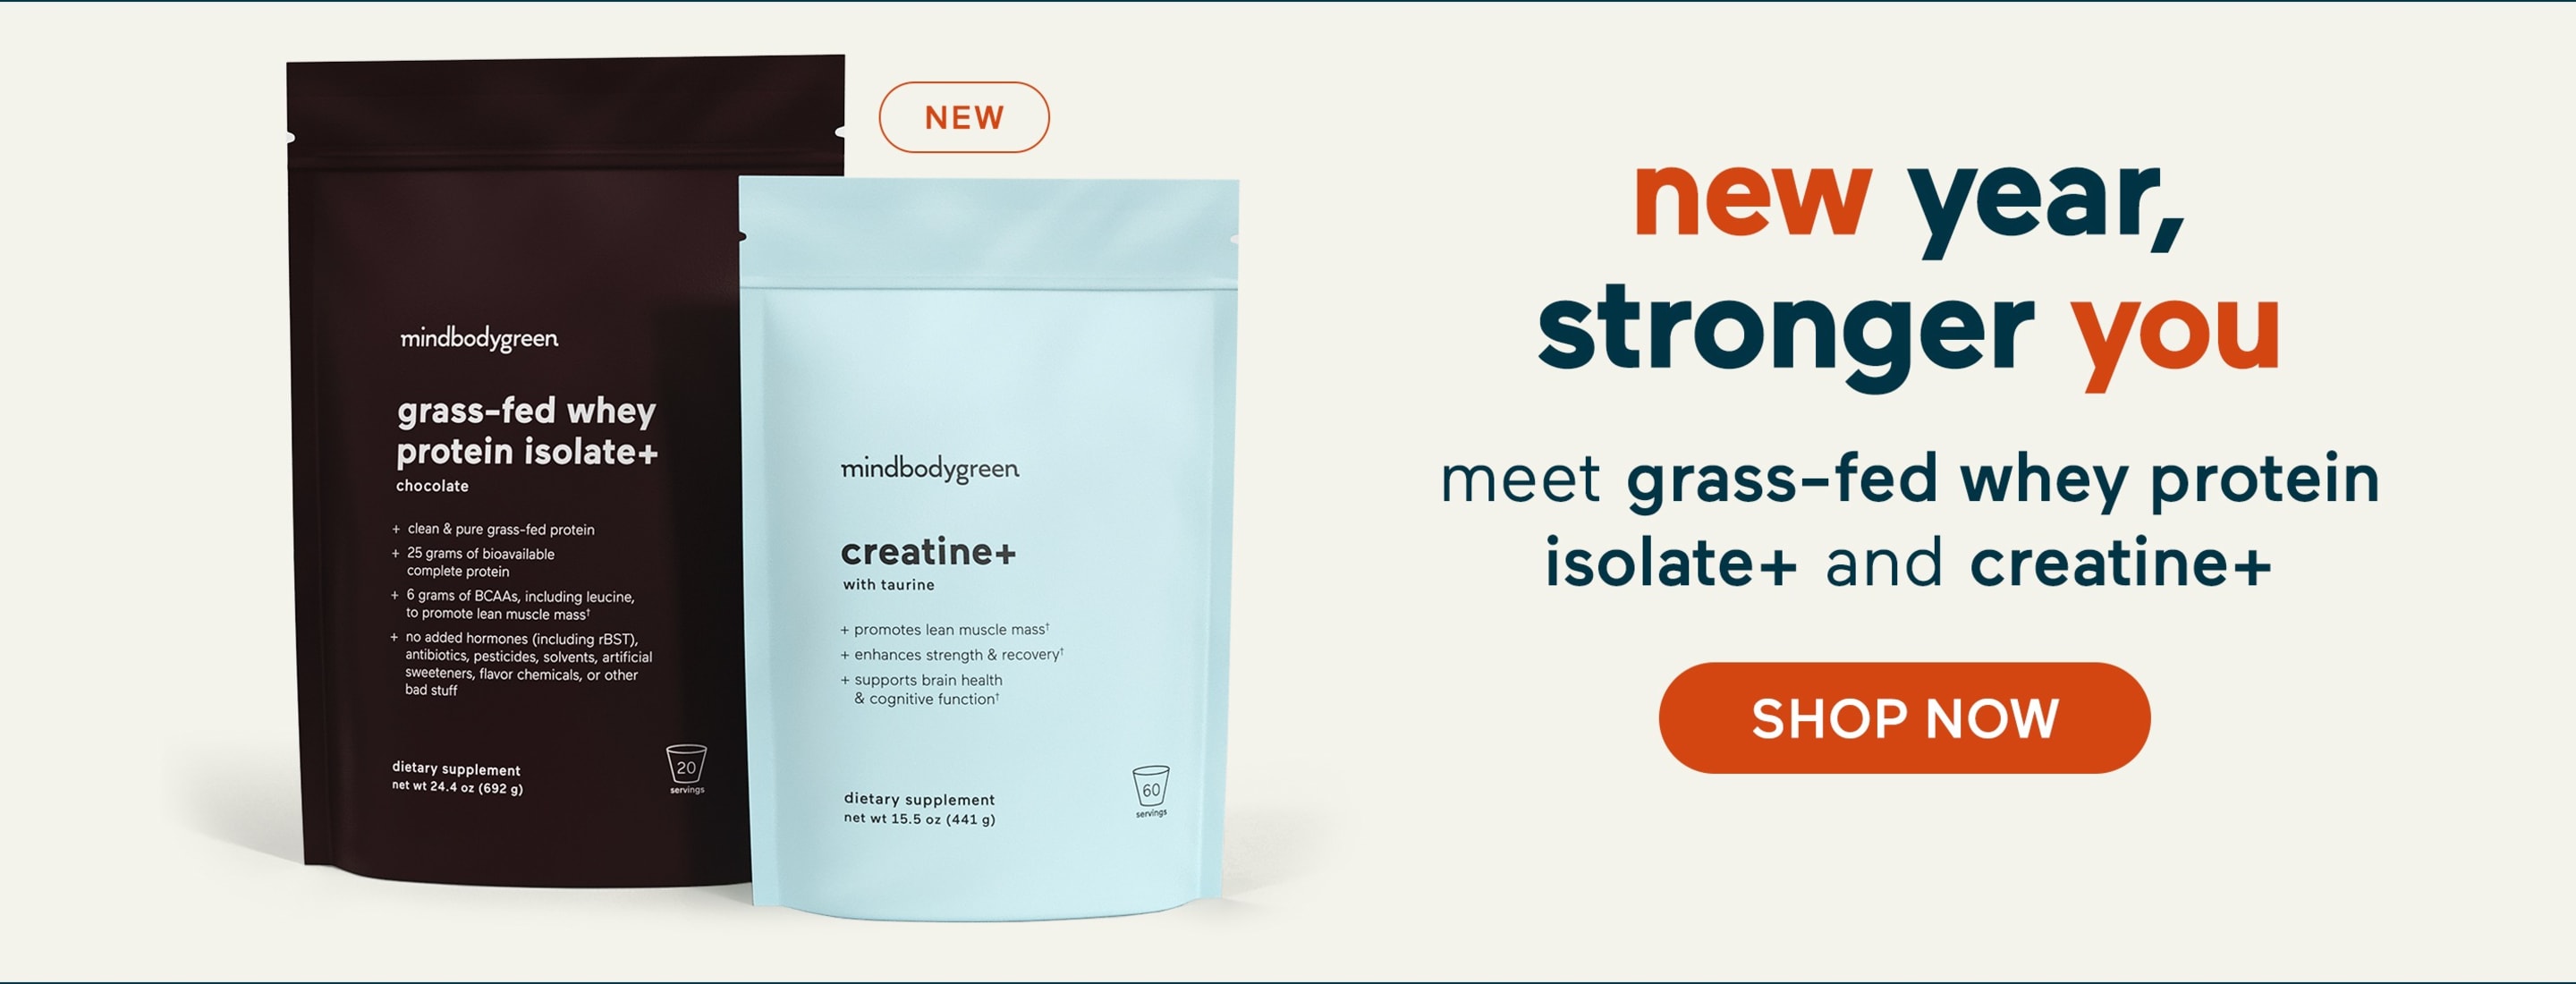 new year, stronger you. meet grass-fed whey protein isolate+ and creatine+. SHOP NOW